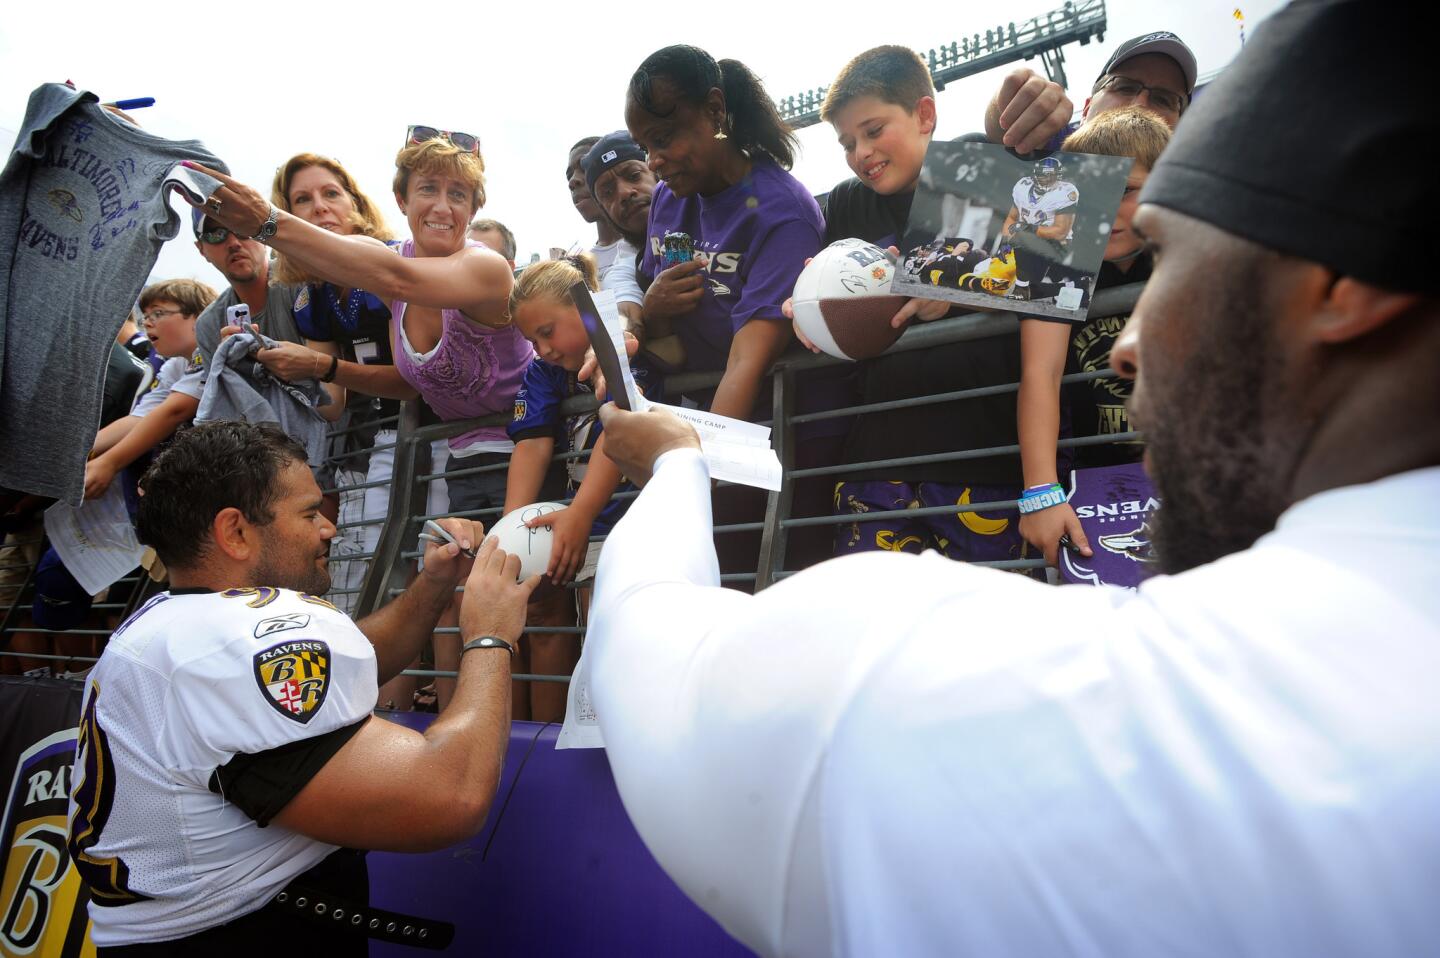 Ravens Haloti Ngata, left, and Ray Lewis sign autographs for fans after practice at M&T Bank Stadium in 2011. It was the only open practice that year after a four-month lockout.